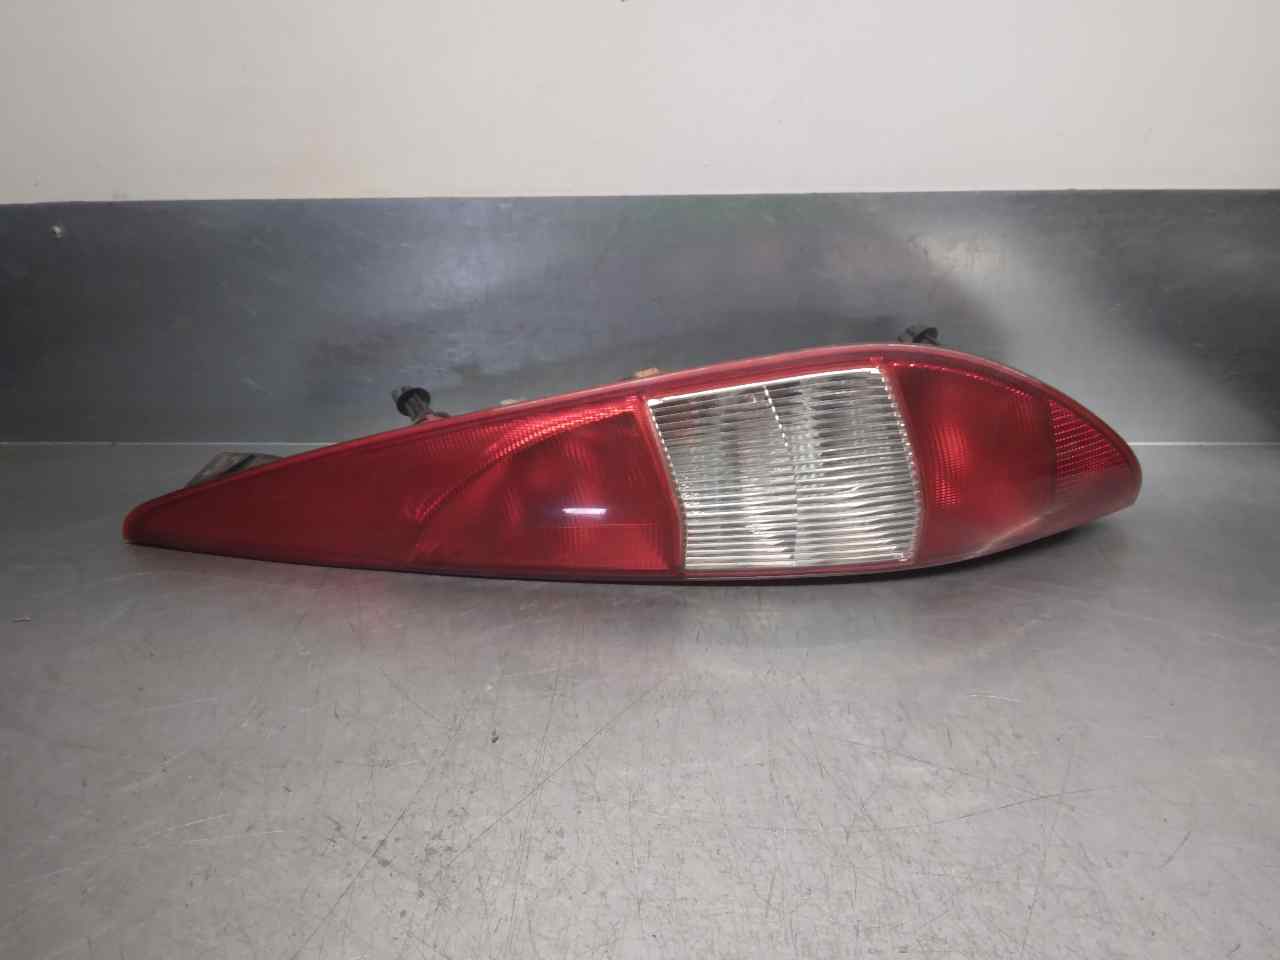 FORD Mondeo 3 generation (2000-2007) Rear Right Taillight Lamp 1S7113404C, 5PUERTAS 19832024